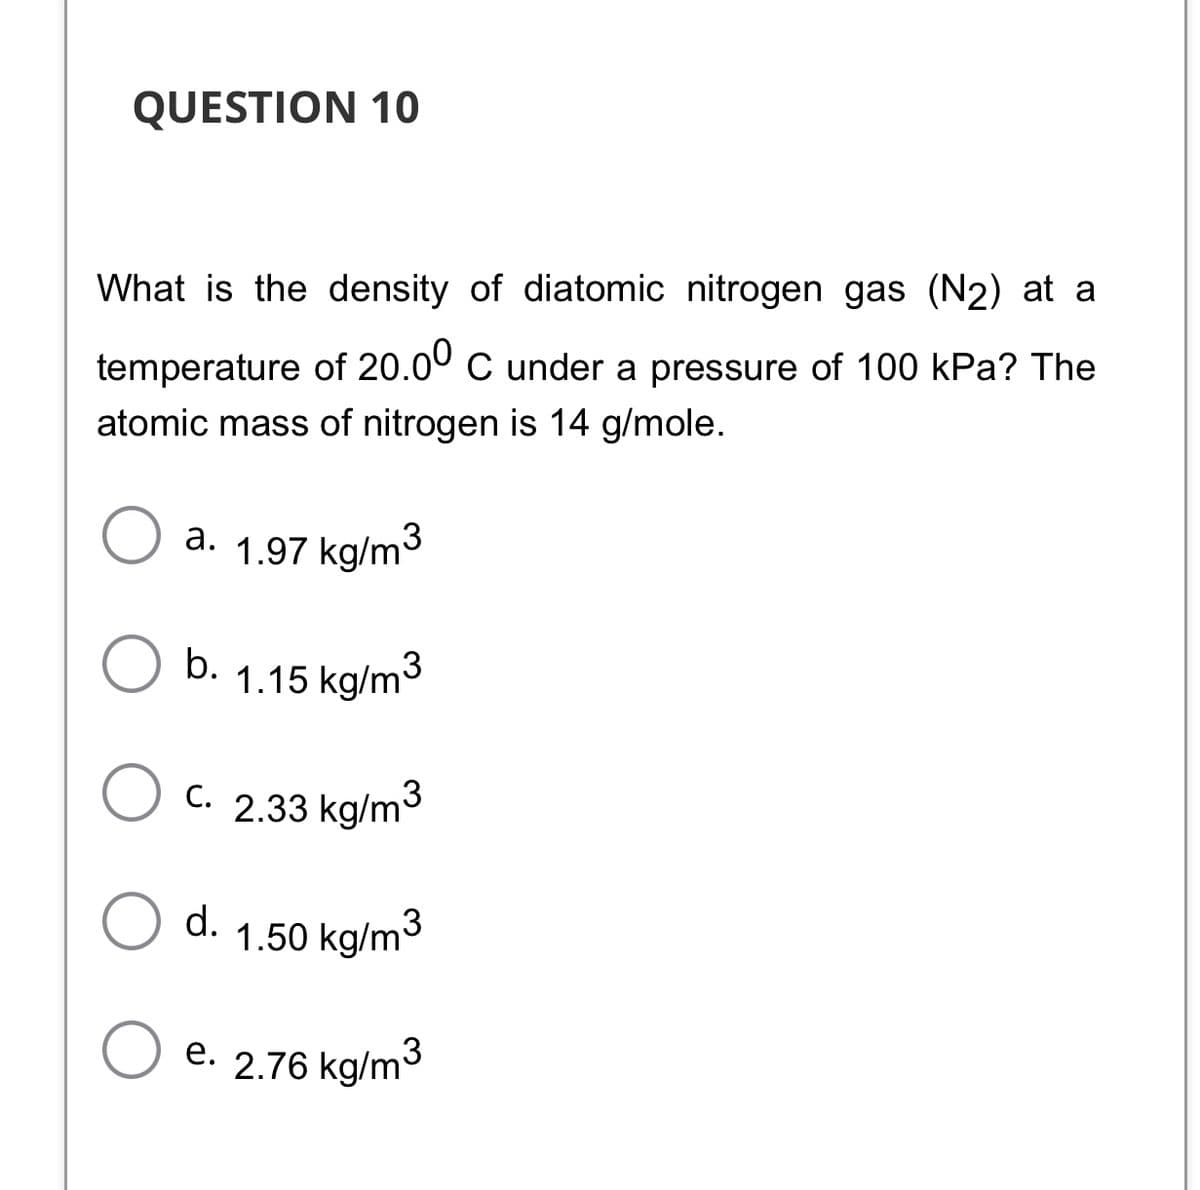 QUESTION 10
What is the density of diatomic nitrogen gas (N2) at a
temperature of 20.00 C under a pressure of 100 kPa? The
atomic mass of nitrogen is 14 g/mole.
a. 1.97 kg/m³
,3
b.
1.15 kg/m3
C. 2.33 kg/m3
d.
1.50 kg/m3
O e. 2.76 kg/m3
